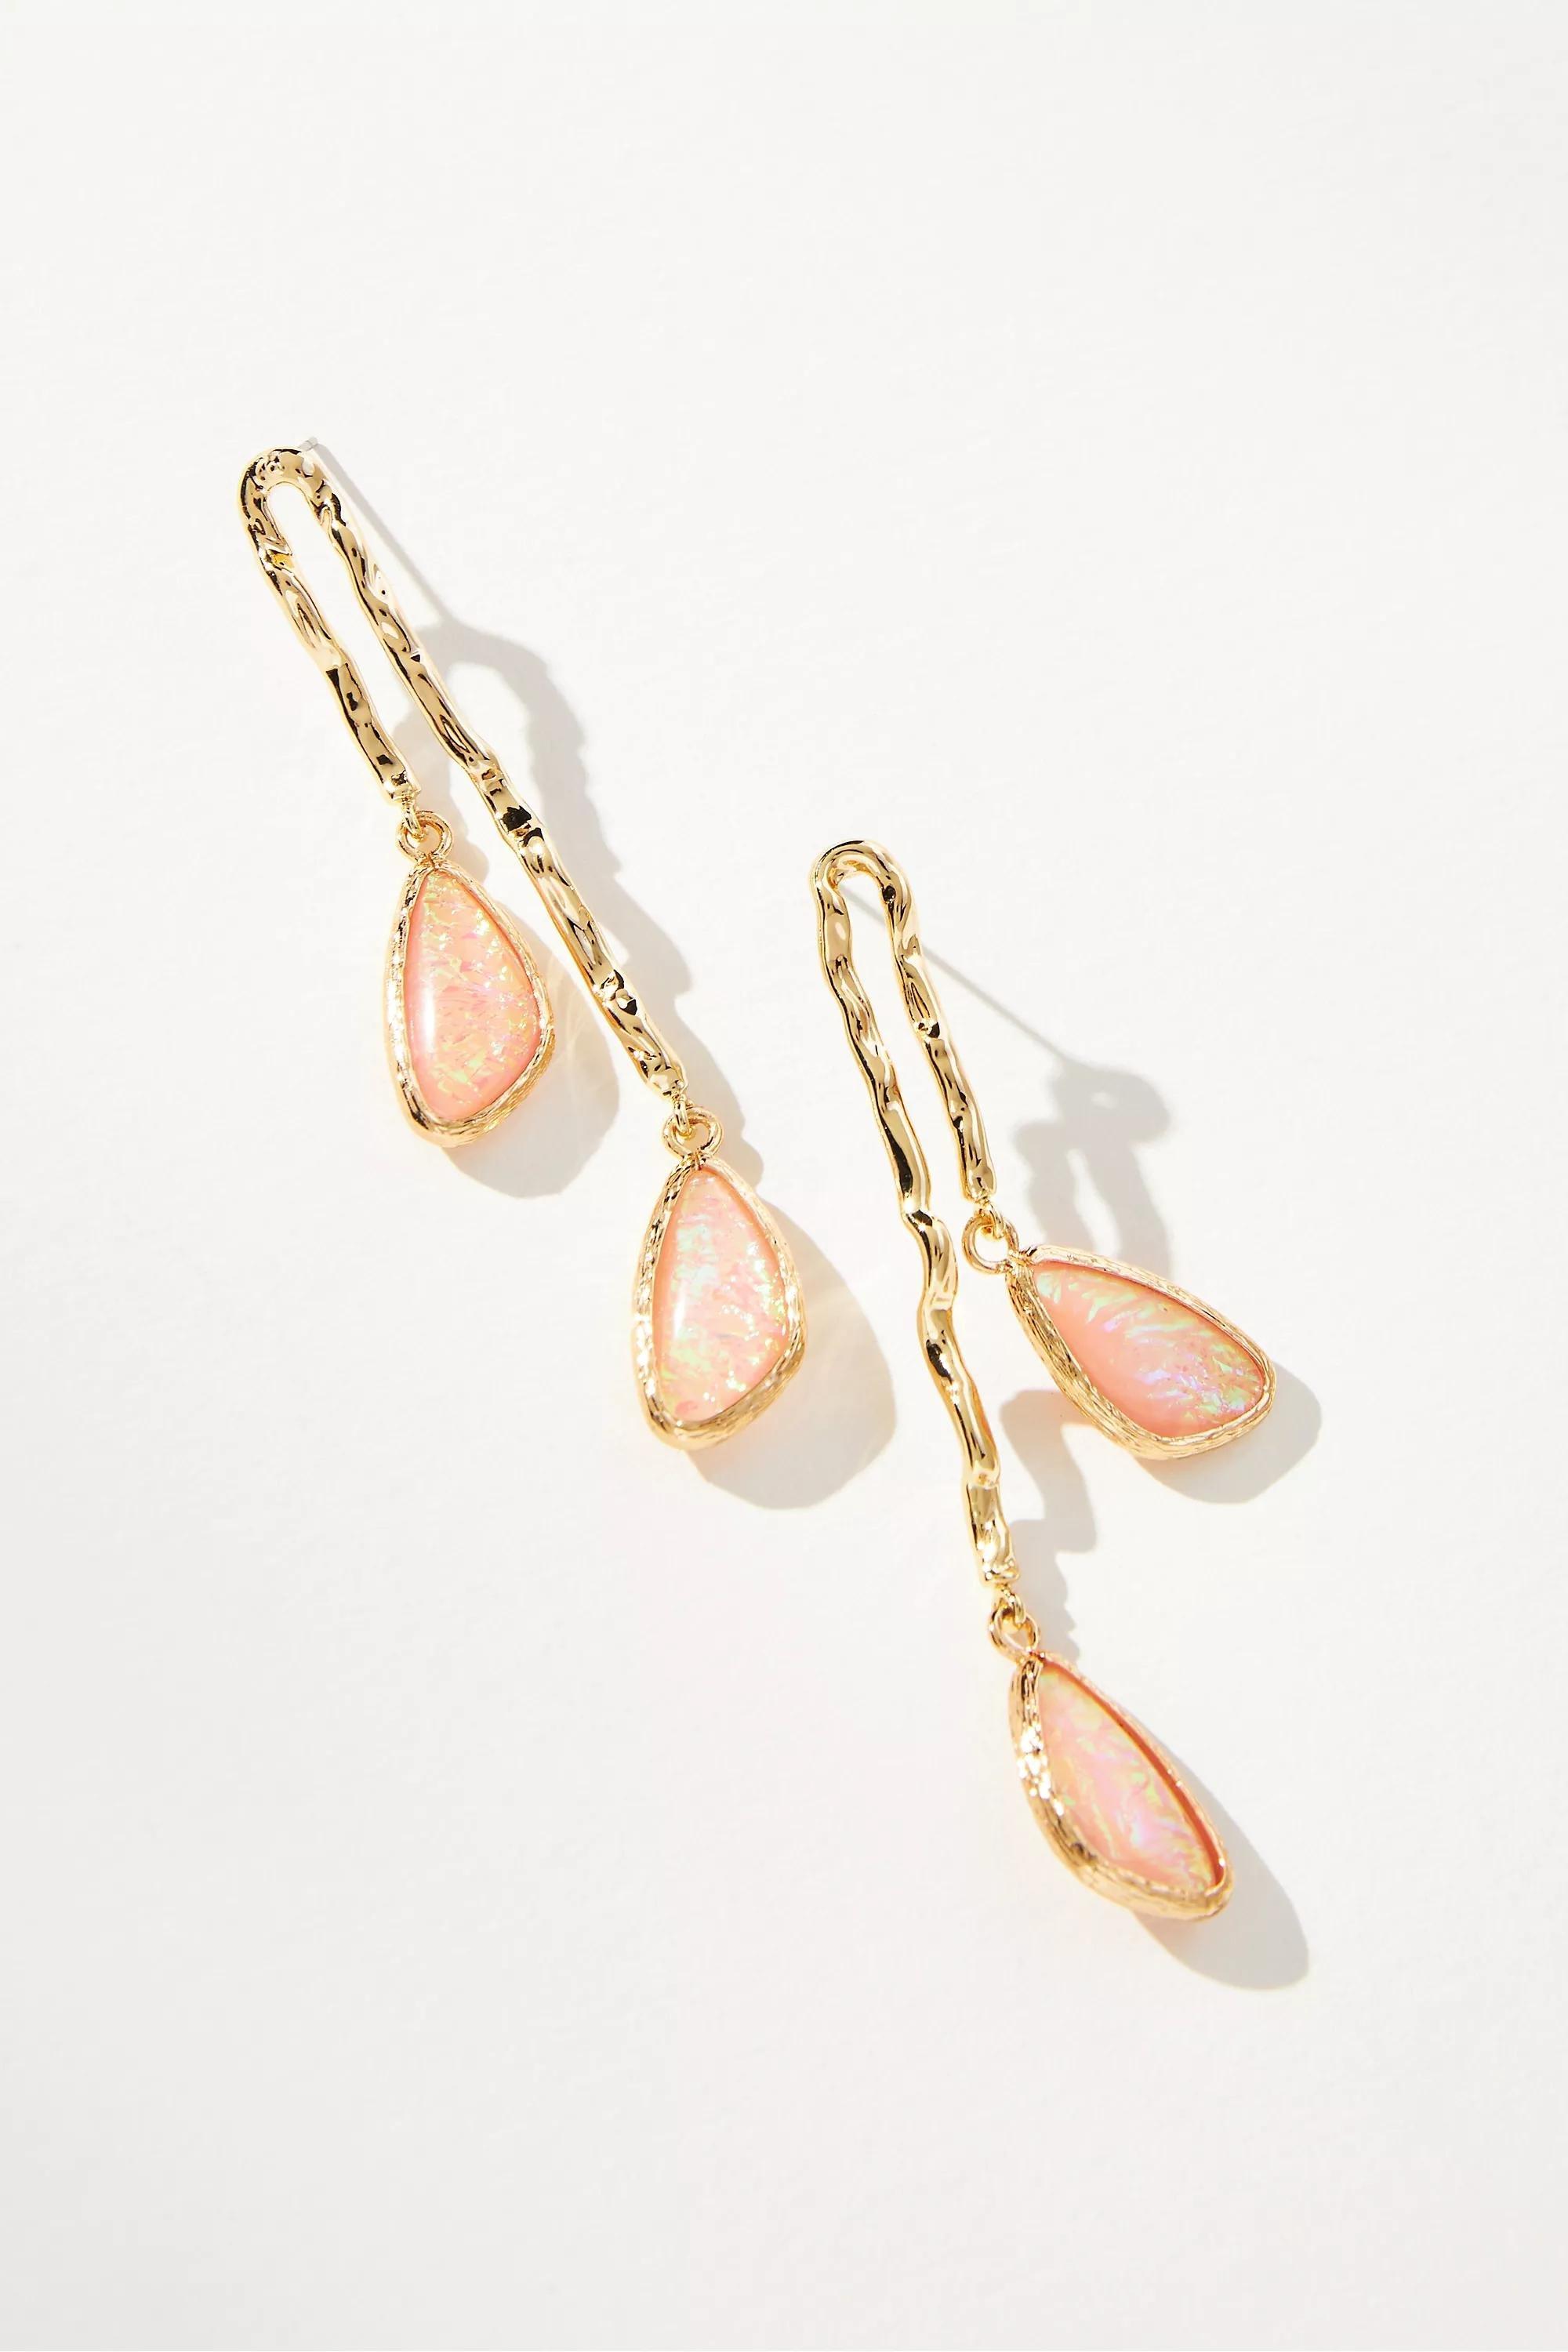 Anthropologie - Double Stone Drop Earrings, Gold-Plated